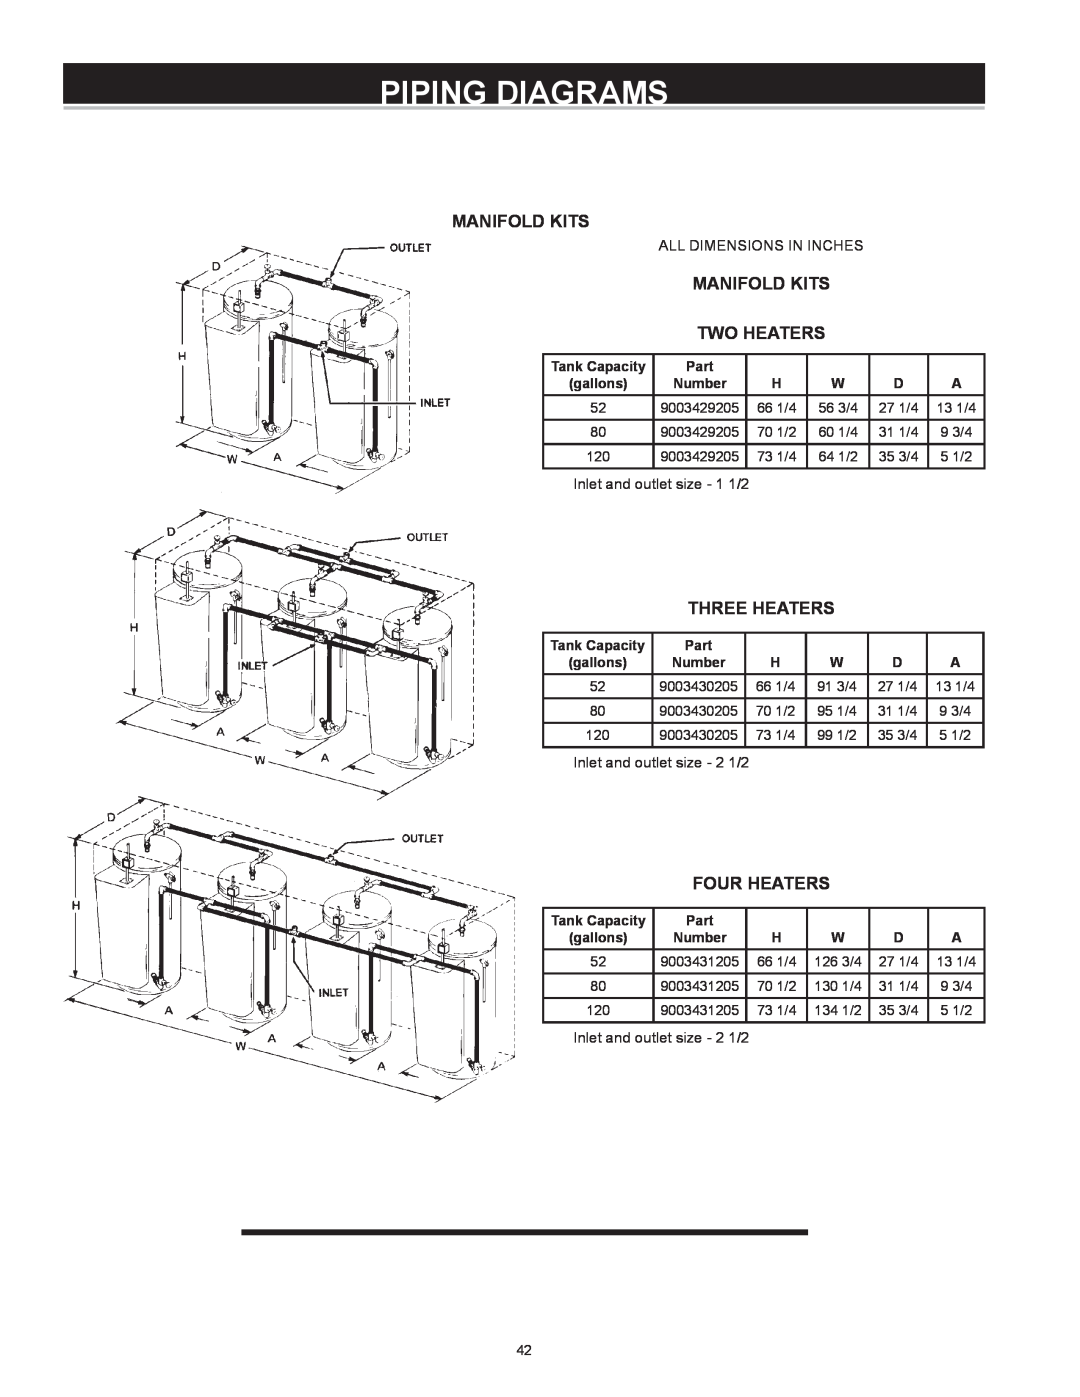 A.O. Smith Dve-52/80/120 Manifold Kits Two Heaters, Three Heaters, Four Heaters, Tank Capacity, Part, Piping Diagrams 